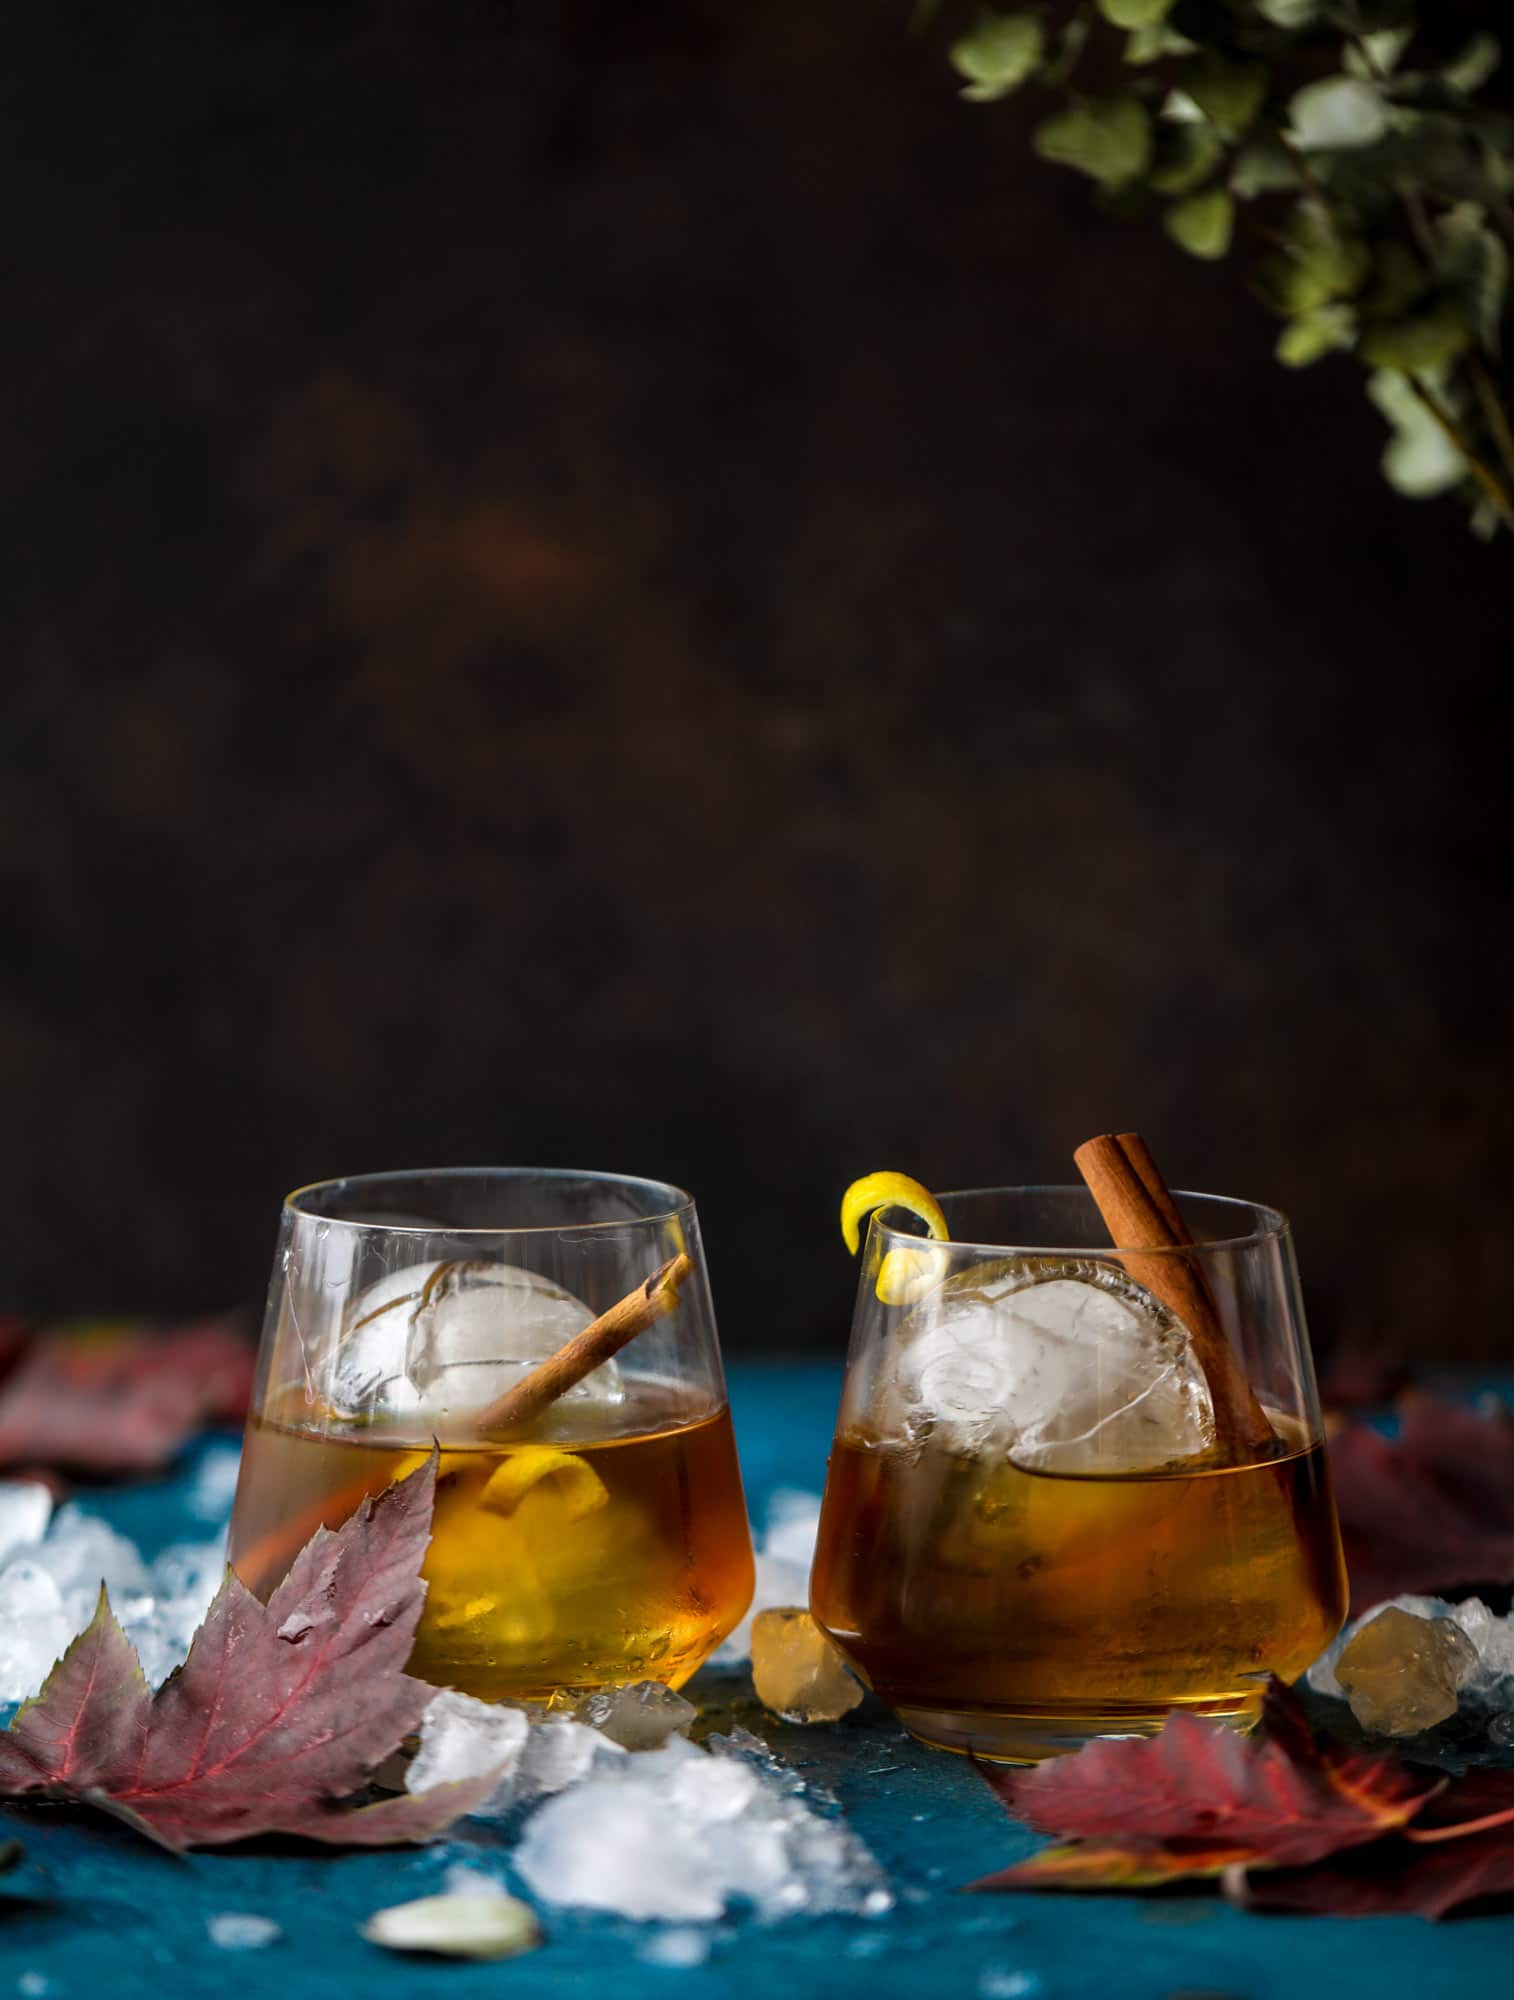 This smoked maple old fashioned cocktail is the perfect smoky drink for fall and winter. It's warming and filled with amazing flavor, using smoked maple bourbon and pure maple syrup. Delicious! I #maple #oldfashioned